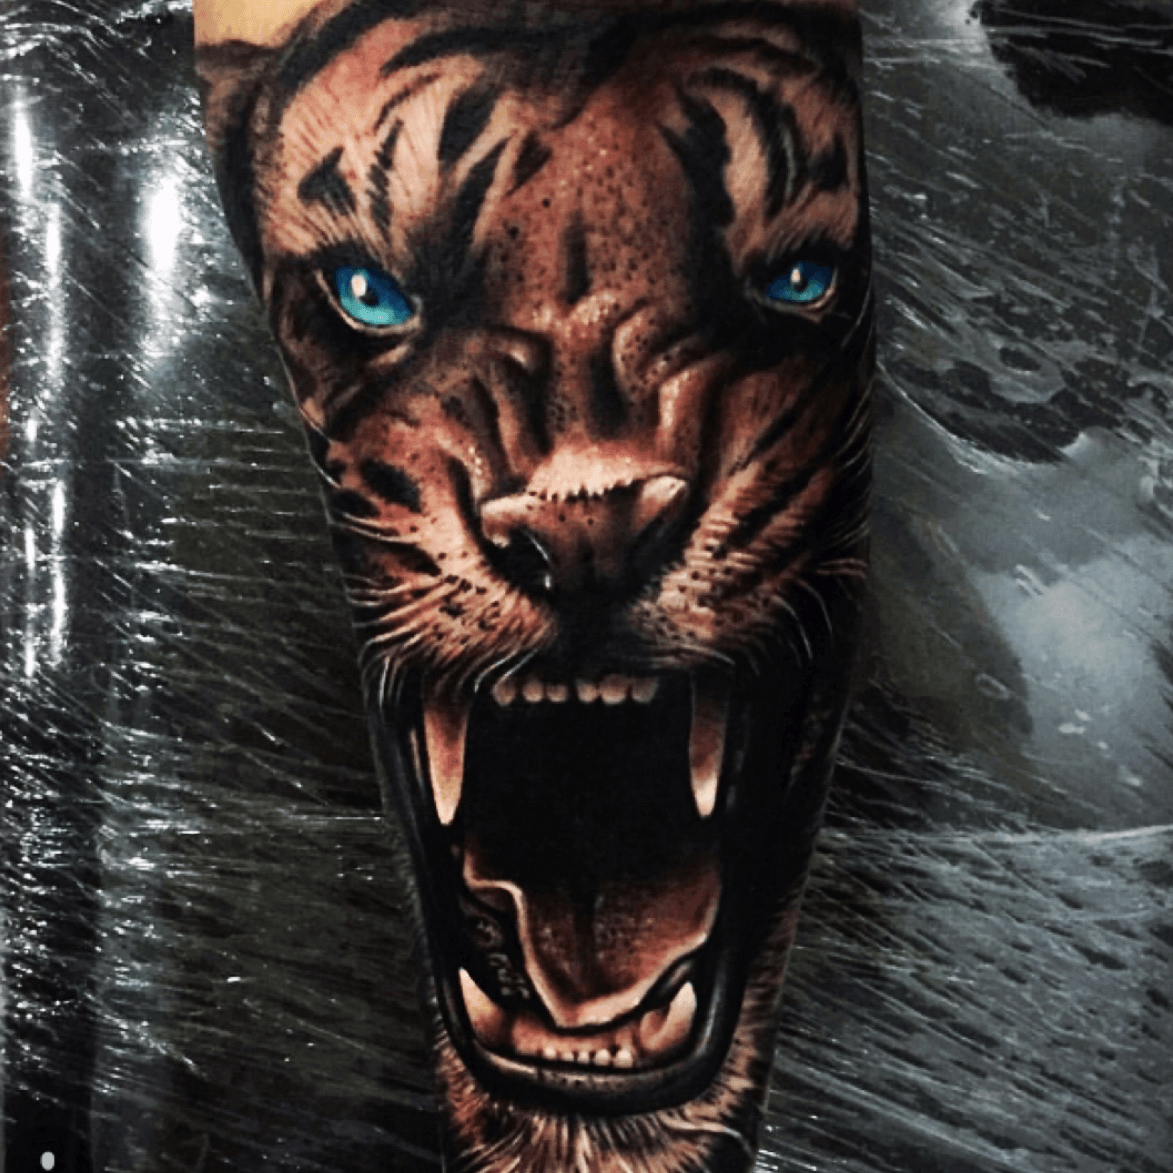 Roaring and Powerful Looking Tiger Face Tattoo  Tattoo Ink Master